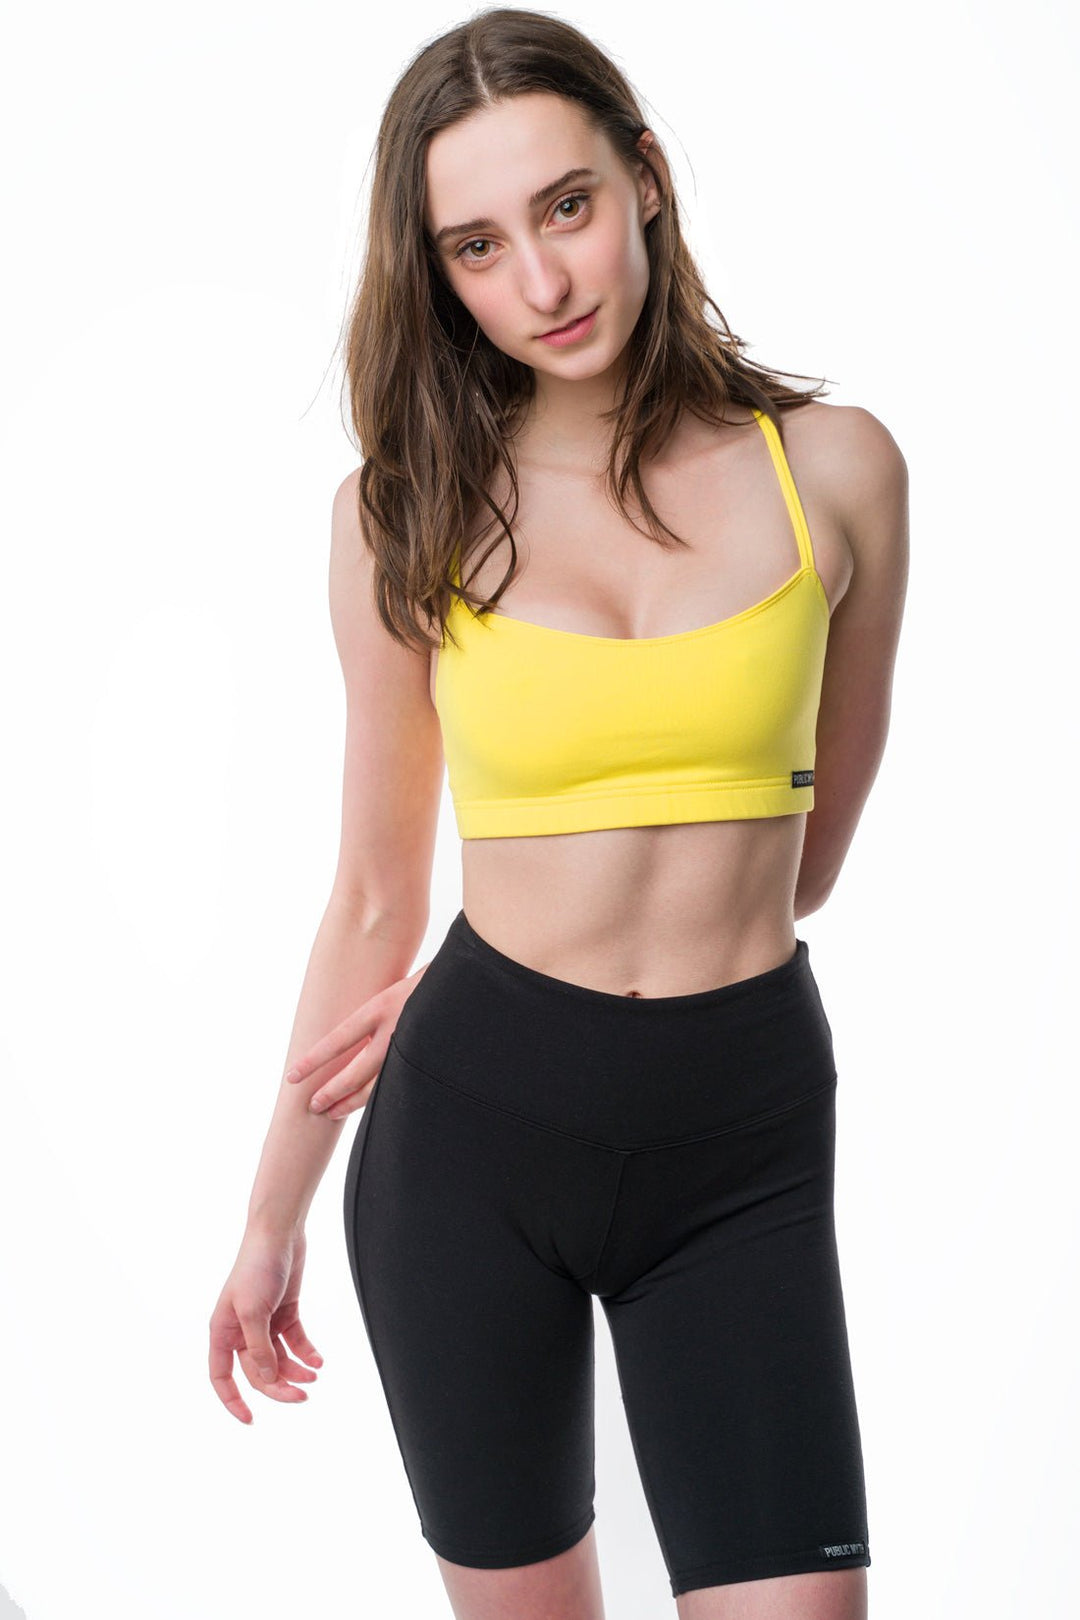 REBL Sports Bra with Sewn-in Pads, High Impact Support with Non